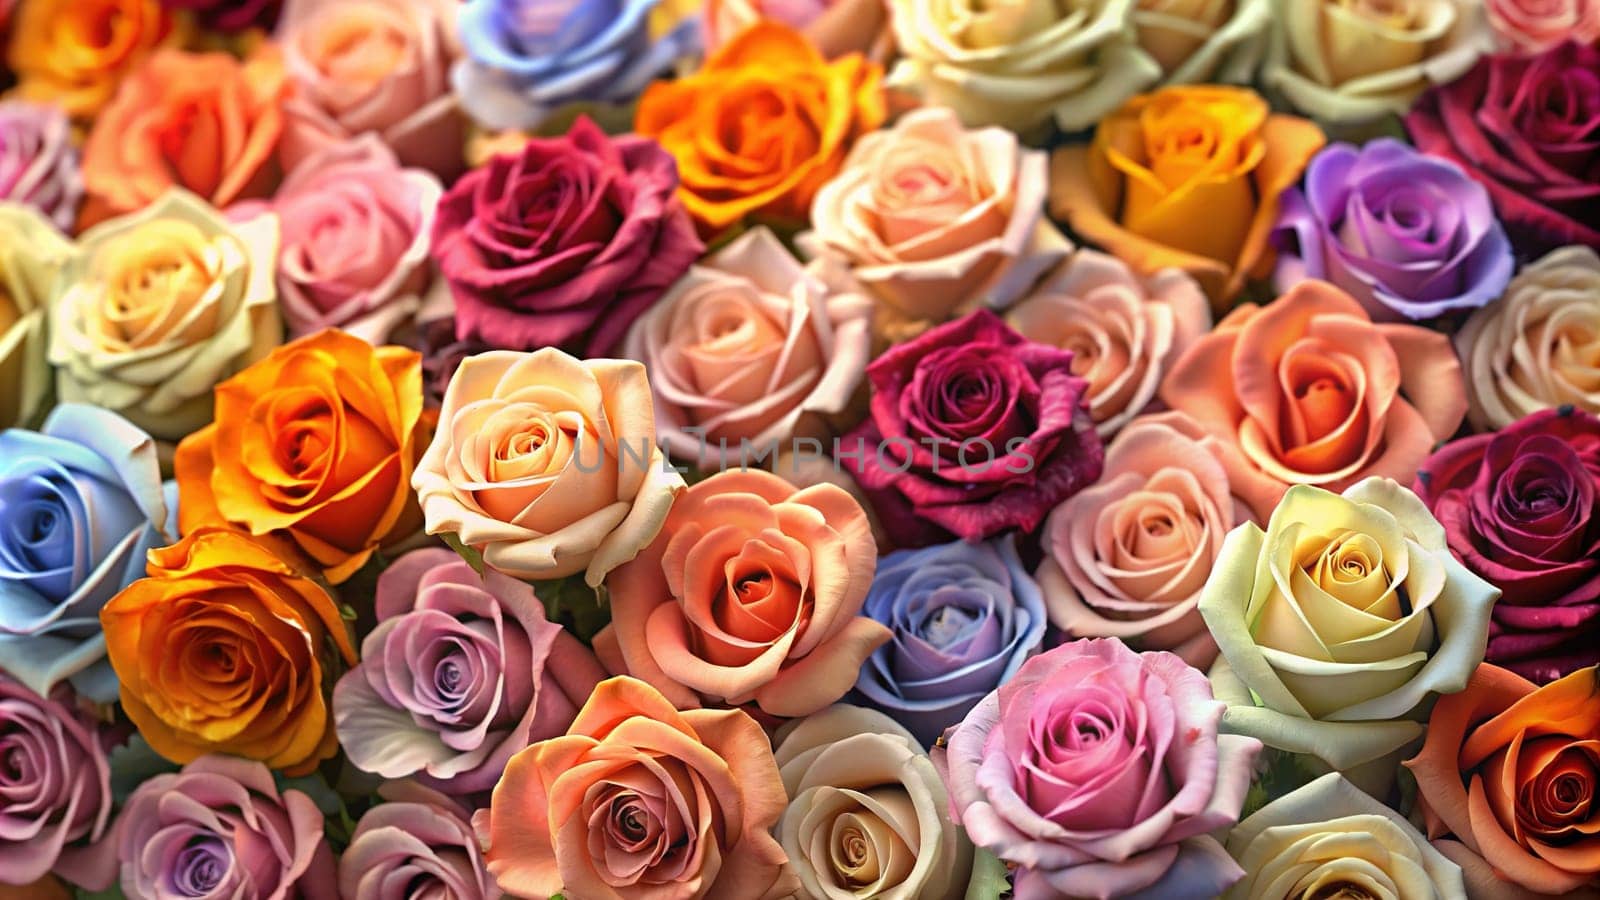 Multicolored roses as a background, top view, close up.Multi-colored roses in a floral arrangement as a background.Bouquet of colorful roses close-up. Floral background.